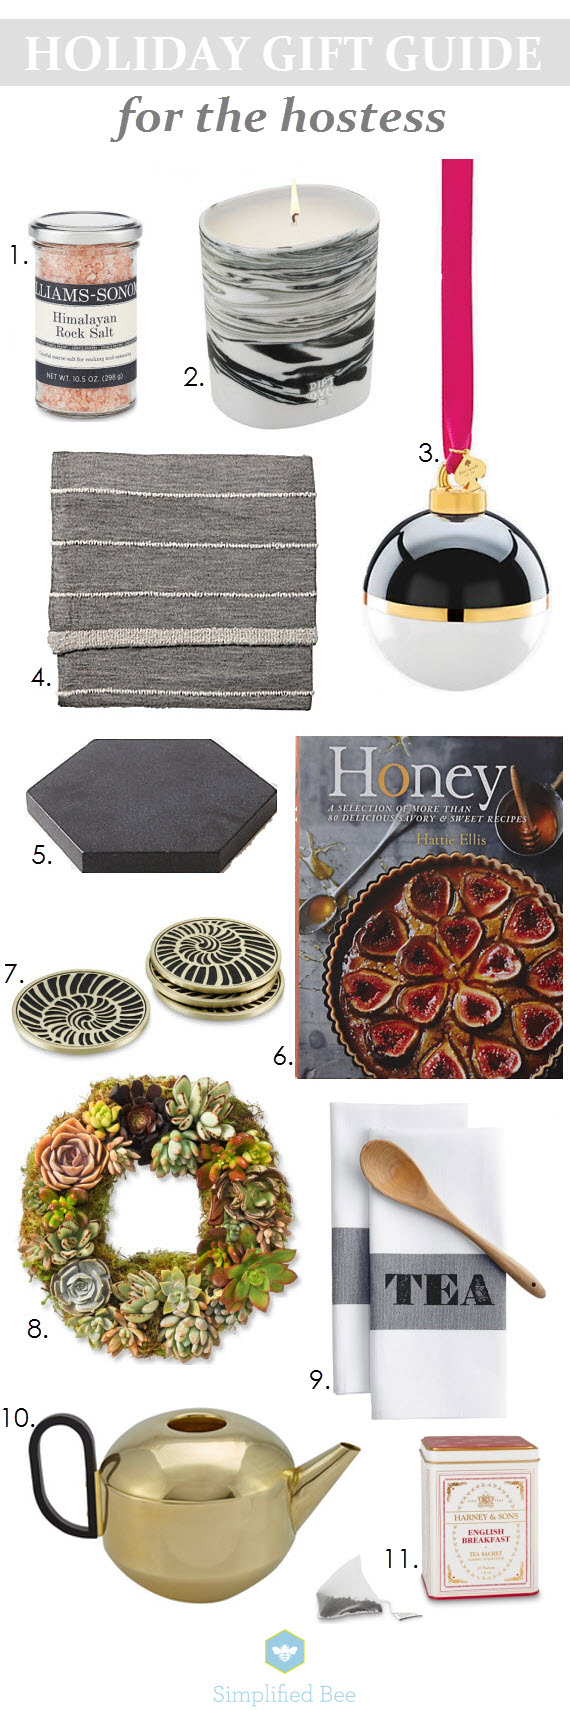 holiday gift guide 2014 // hostess gift ideas // simplified bee #holiday #gifts